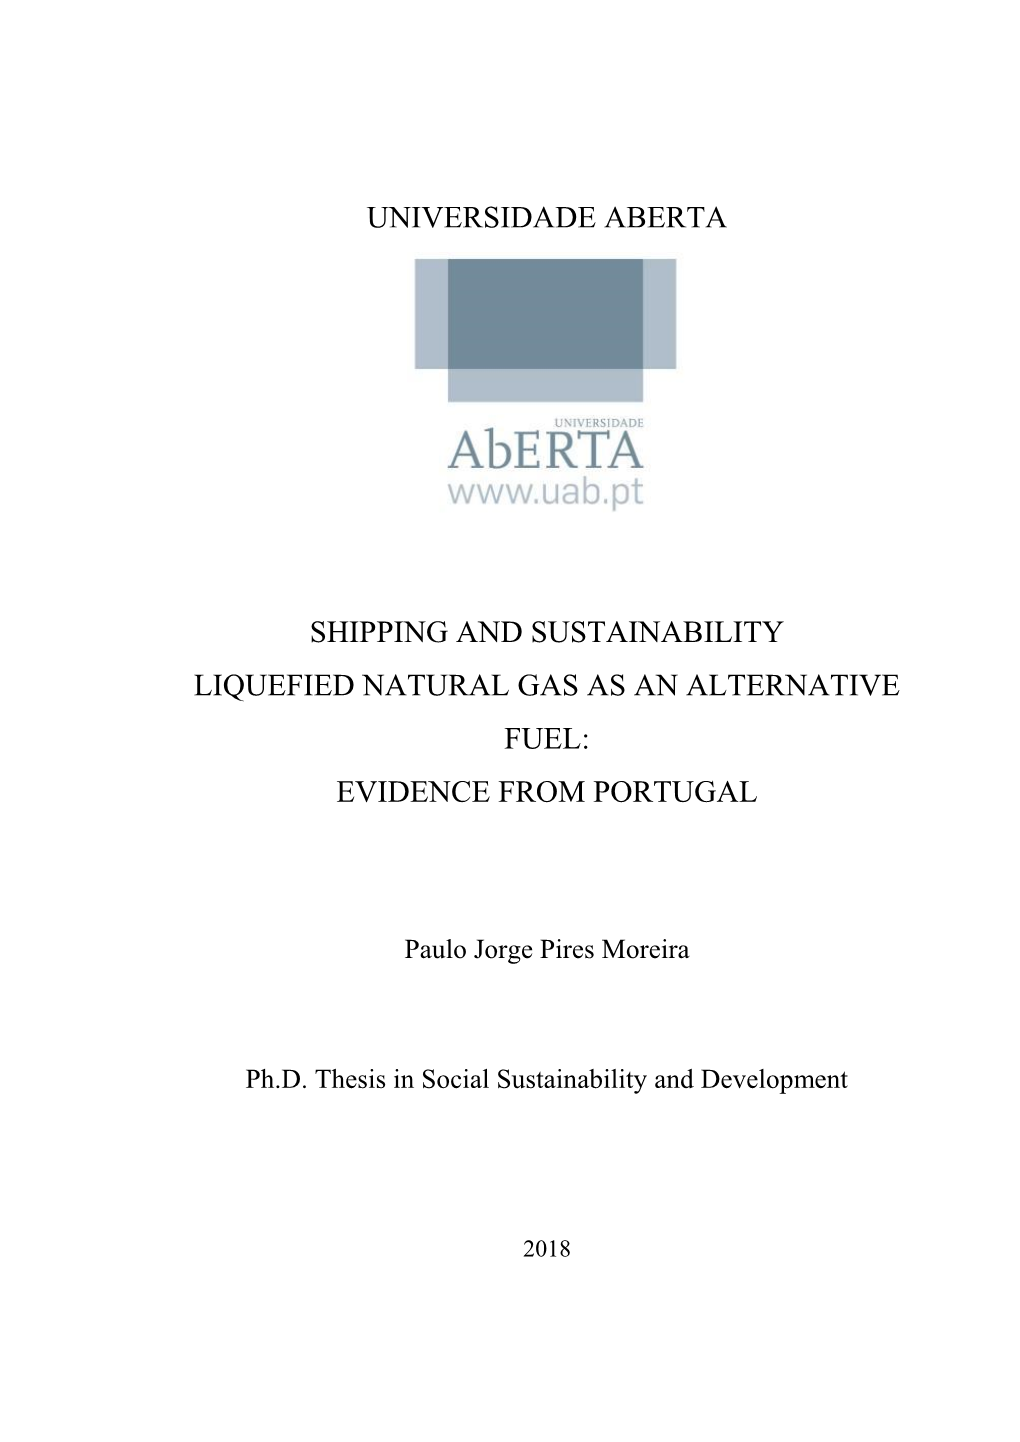 Universidade Aberta Shipping and Sustainability Liquefied Natural Gas As an Alternative Fuel: Evidence from Portugal